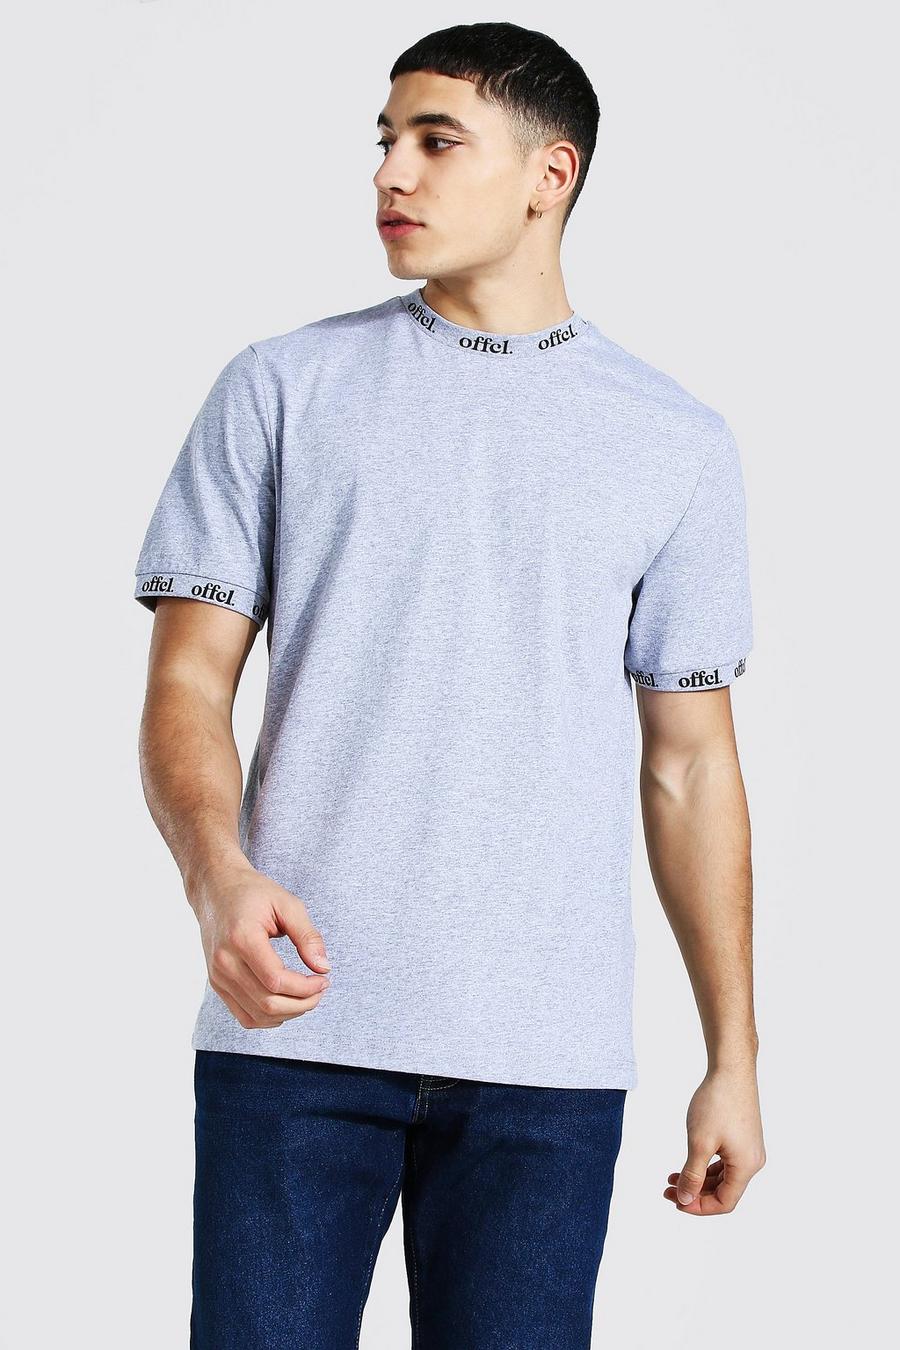 Grey marl Offcl Neck And Cuff Print T-shirt image number 1